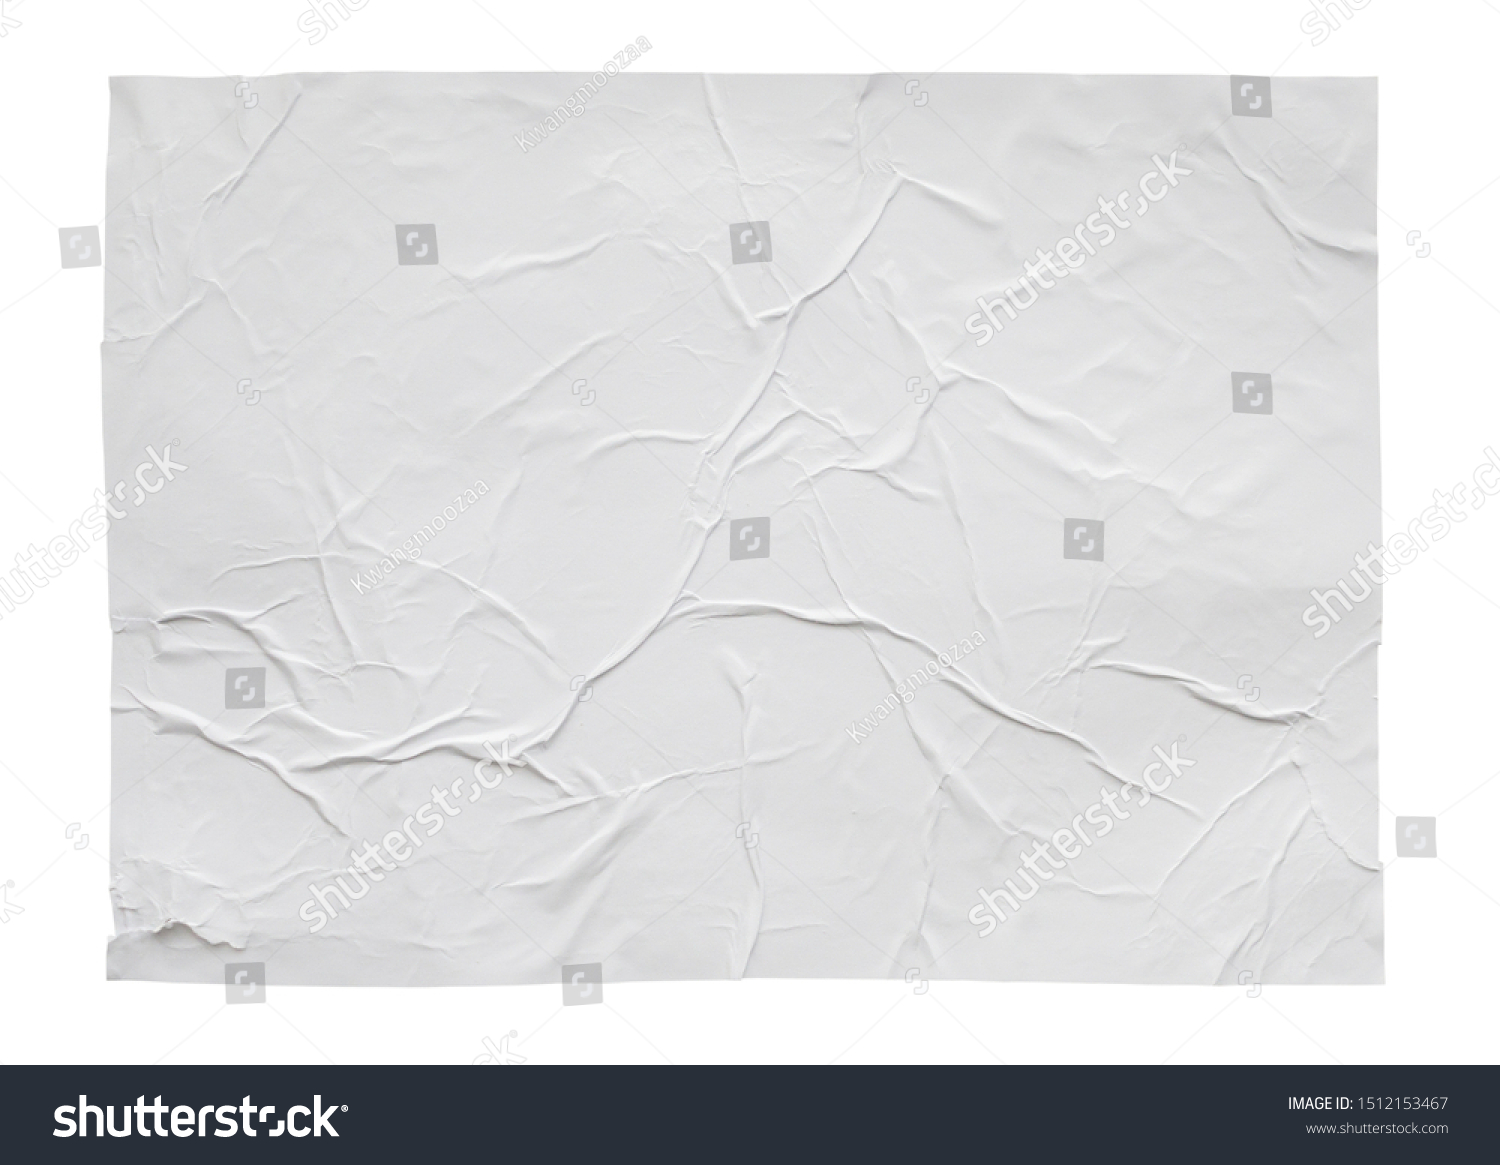 Blank white crumpled and creased sticker paper poster texture isolated on white background #1512153467